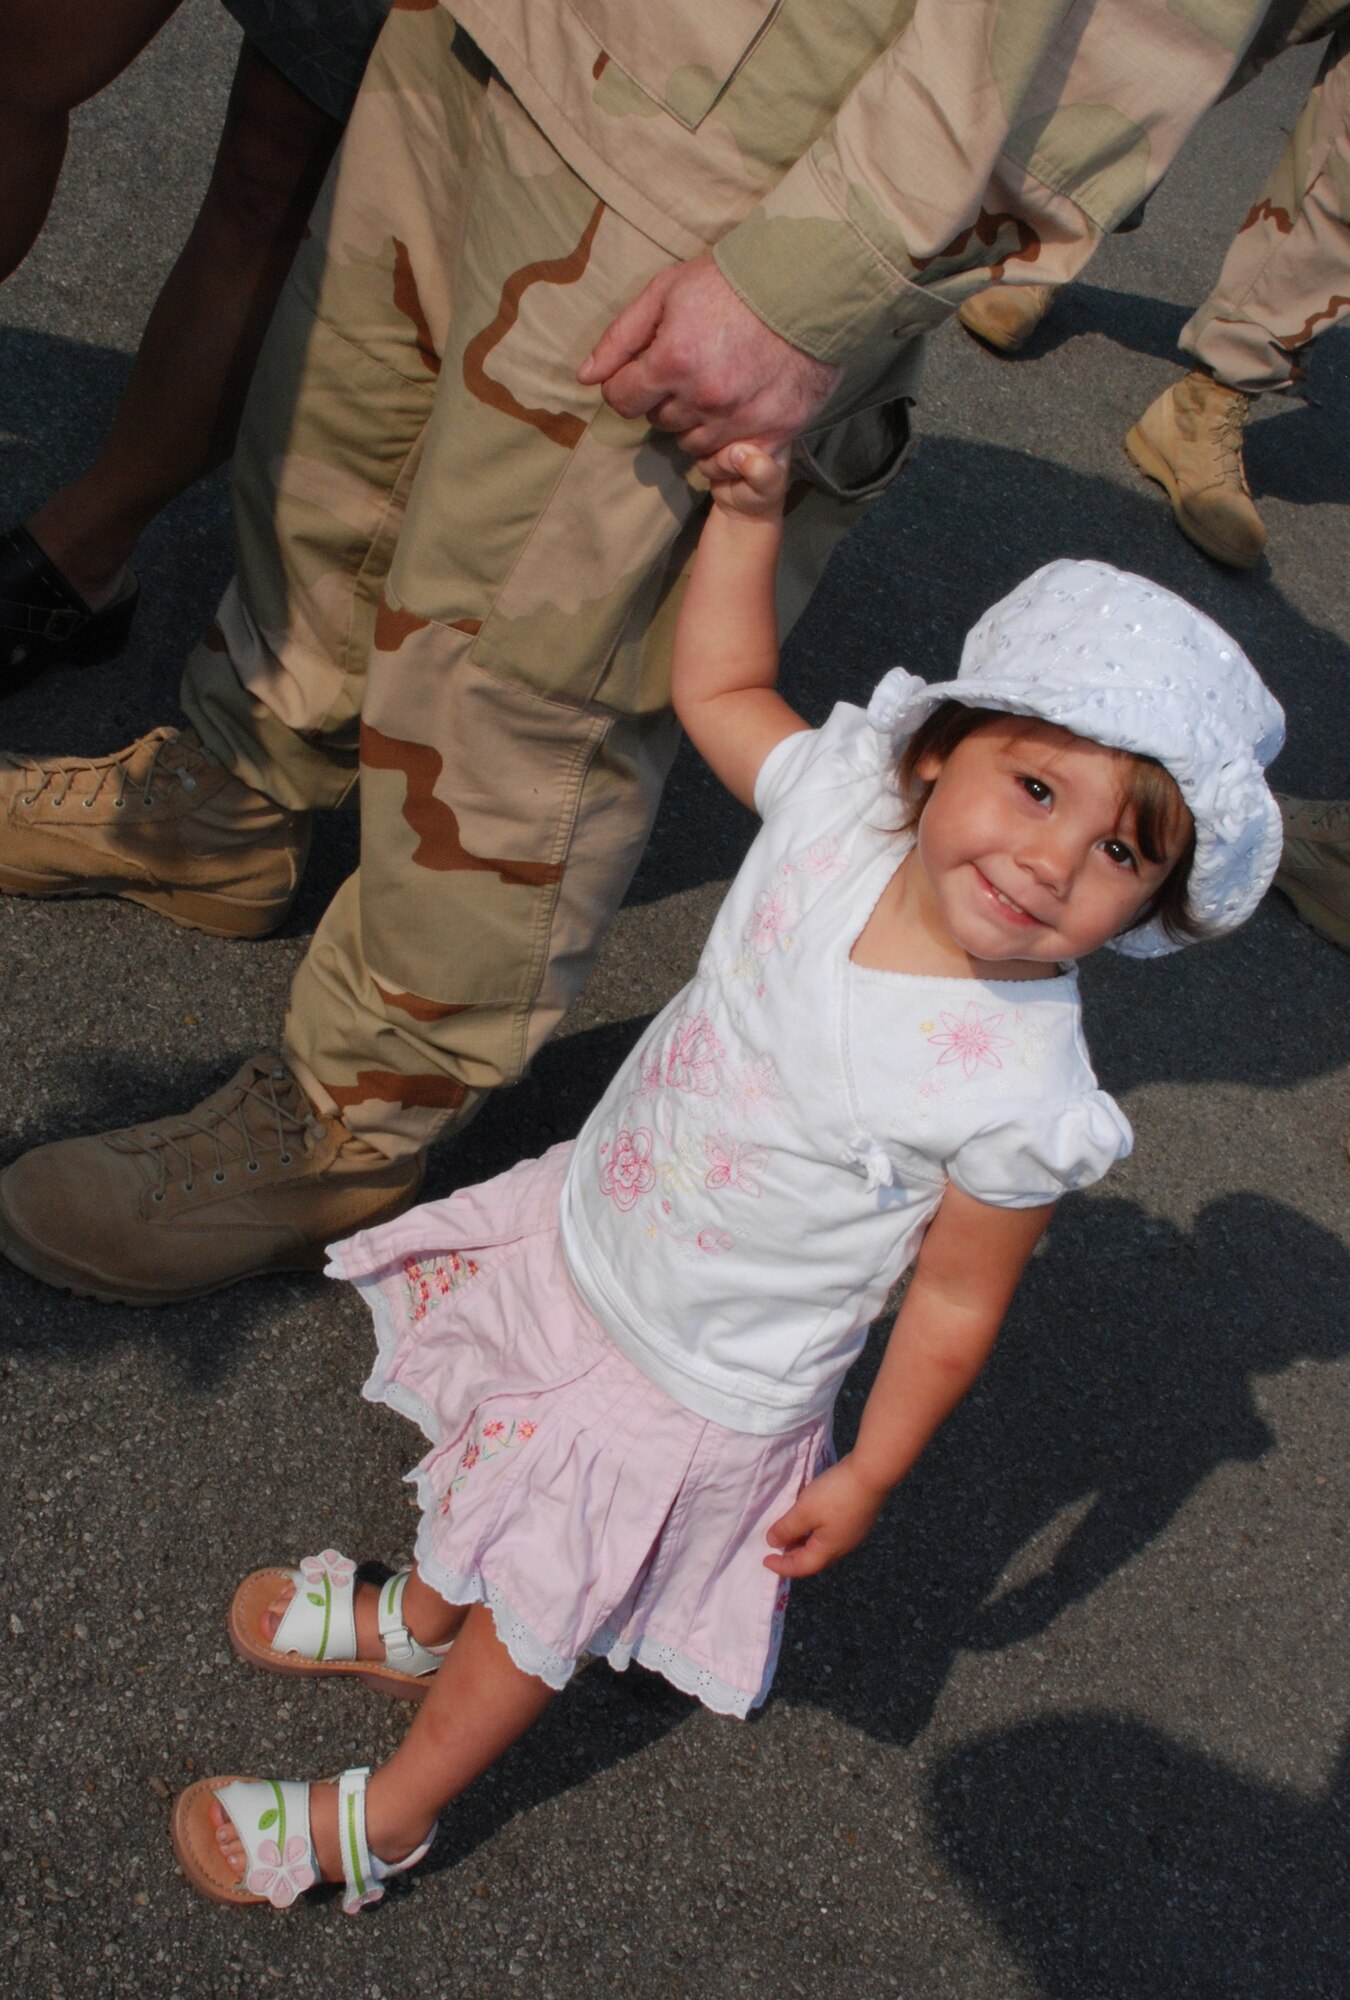 EGLIN AIR FORCE BASE, Fla. -- Ryleigh Edwards, 2, holds the hand of her grandfather, Capt. George Sanderlin, after reuniting with him May 24 at the homecoming celebration for the 728th Air Control Squadron. Family members gathered in front of the squadron as more than 175 members of the 728th ACS, the Demons, returned home from a deployment to Southwest Asia in support of Operation Iraqi Freedom. The 728th ACS mission encompasses the widest variety of Air Force careers, affording it global reach and the ability to complete its mission anywhere needed. The Airmen spent the last five months in Iraq controlling and monitoring Iraqi airspace, assisting in providing close air support for troops in conflict and reconnaissance and directing tanker traffic for refueling efforts. The squadron has spent nine of the past 12 months deployed. (U.S. Air Force photo by Staff Sgt. Mike Meares)